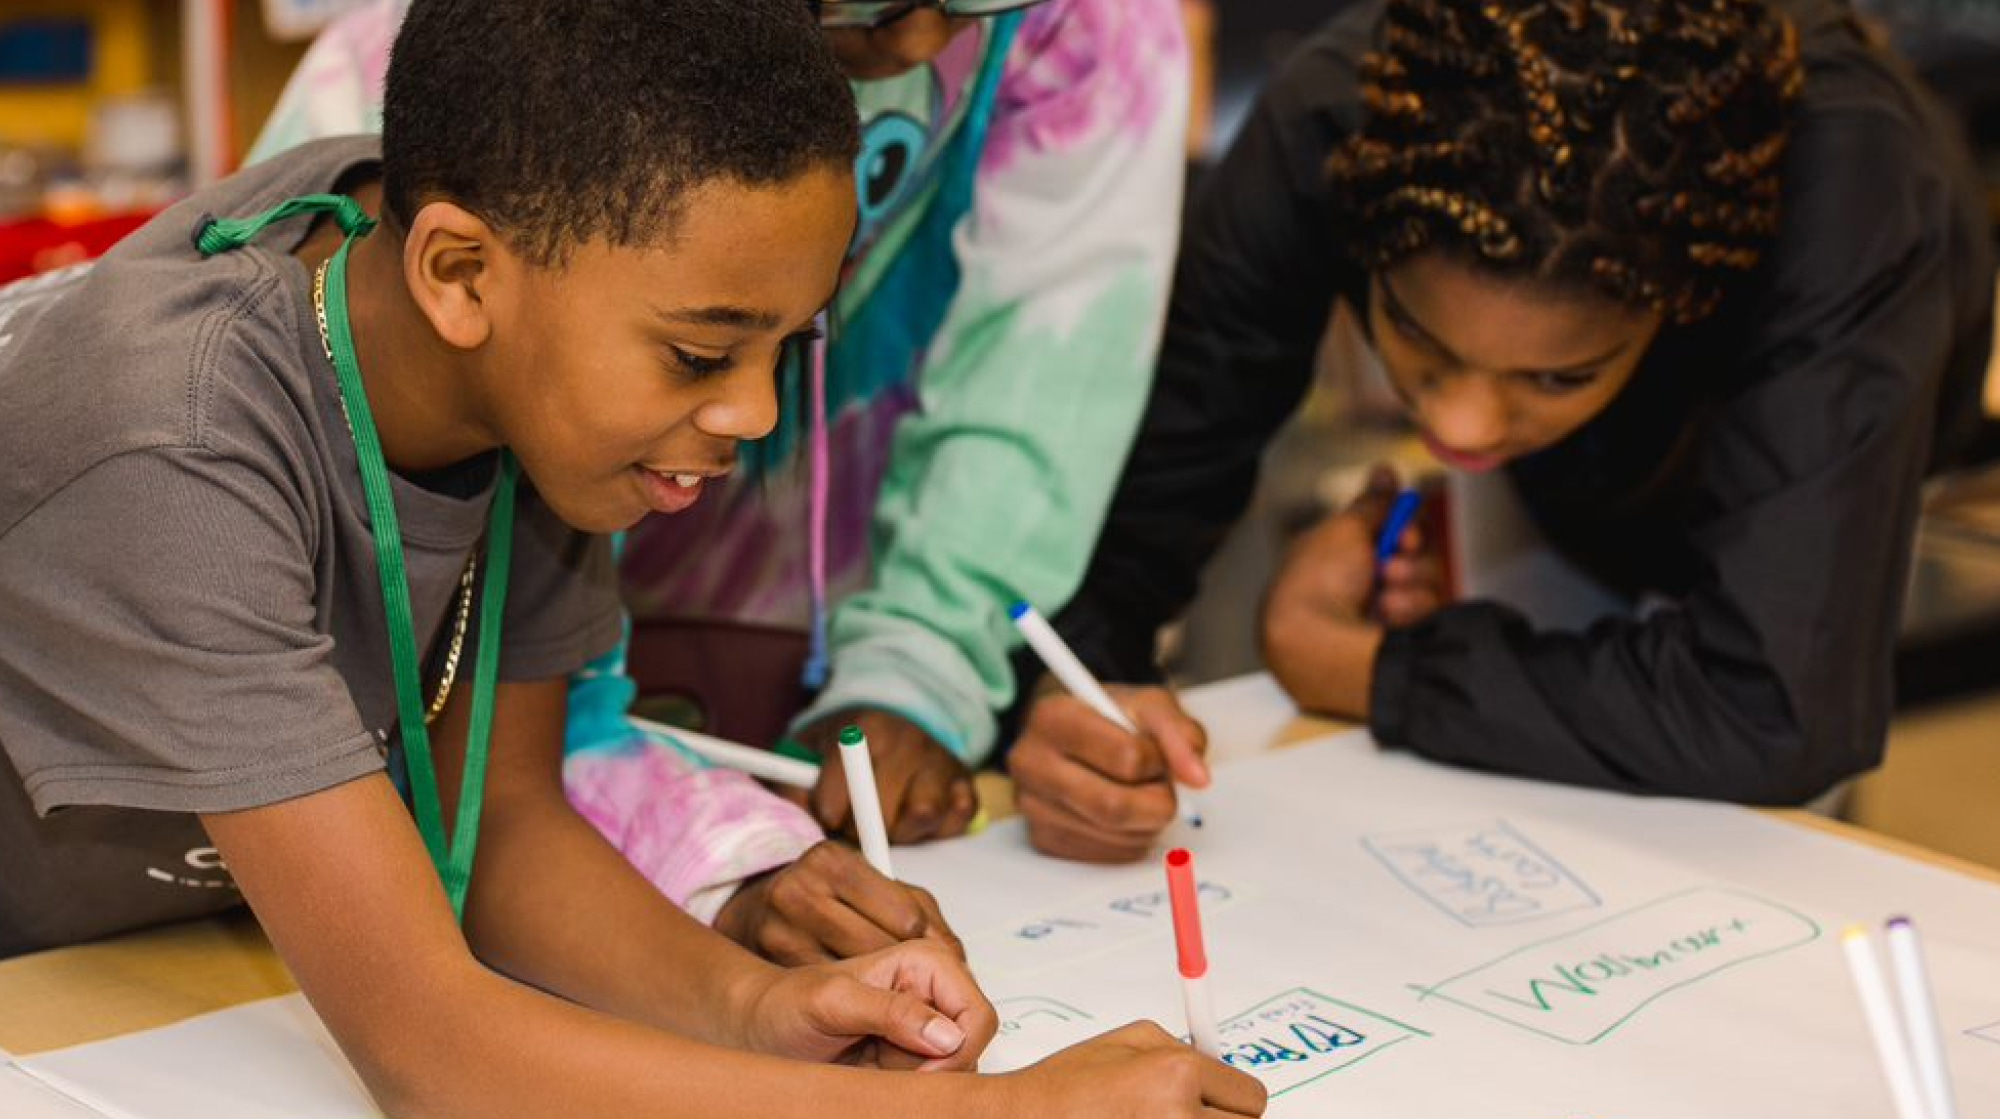 A Black student draws on paper in a classroom with his classmates